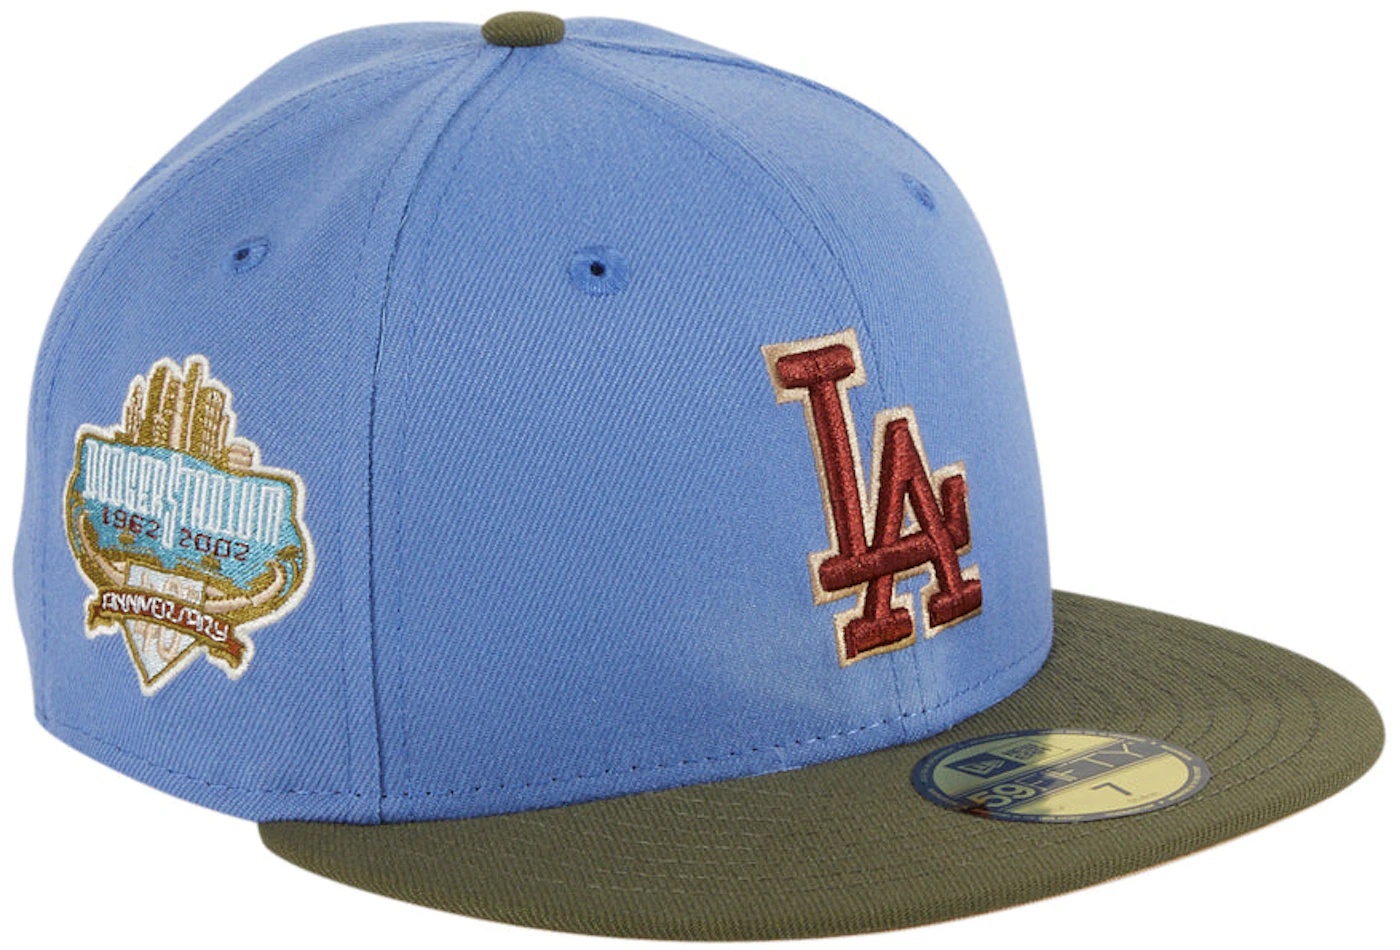 Los Angeles Dodgers 60th Anniversary Sky Blue 59Fifty Fitted Hat